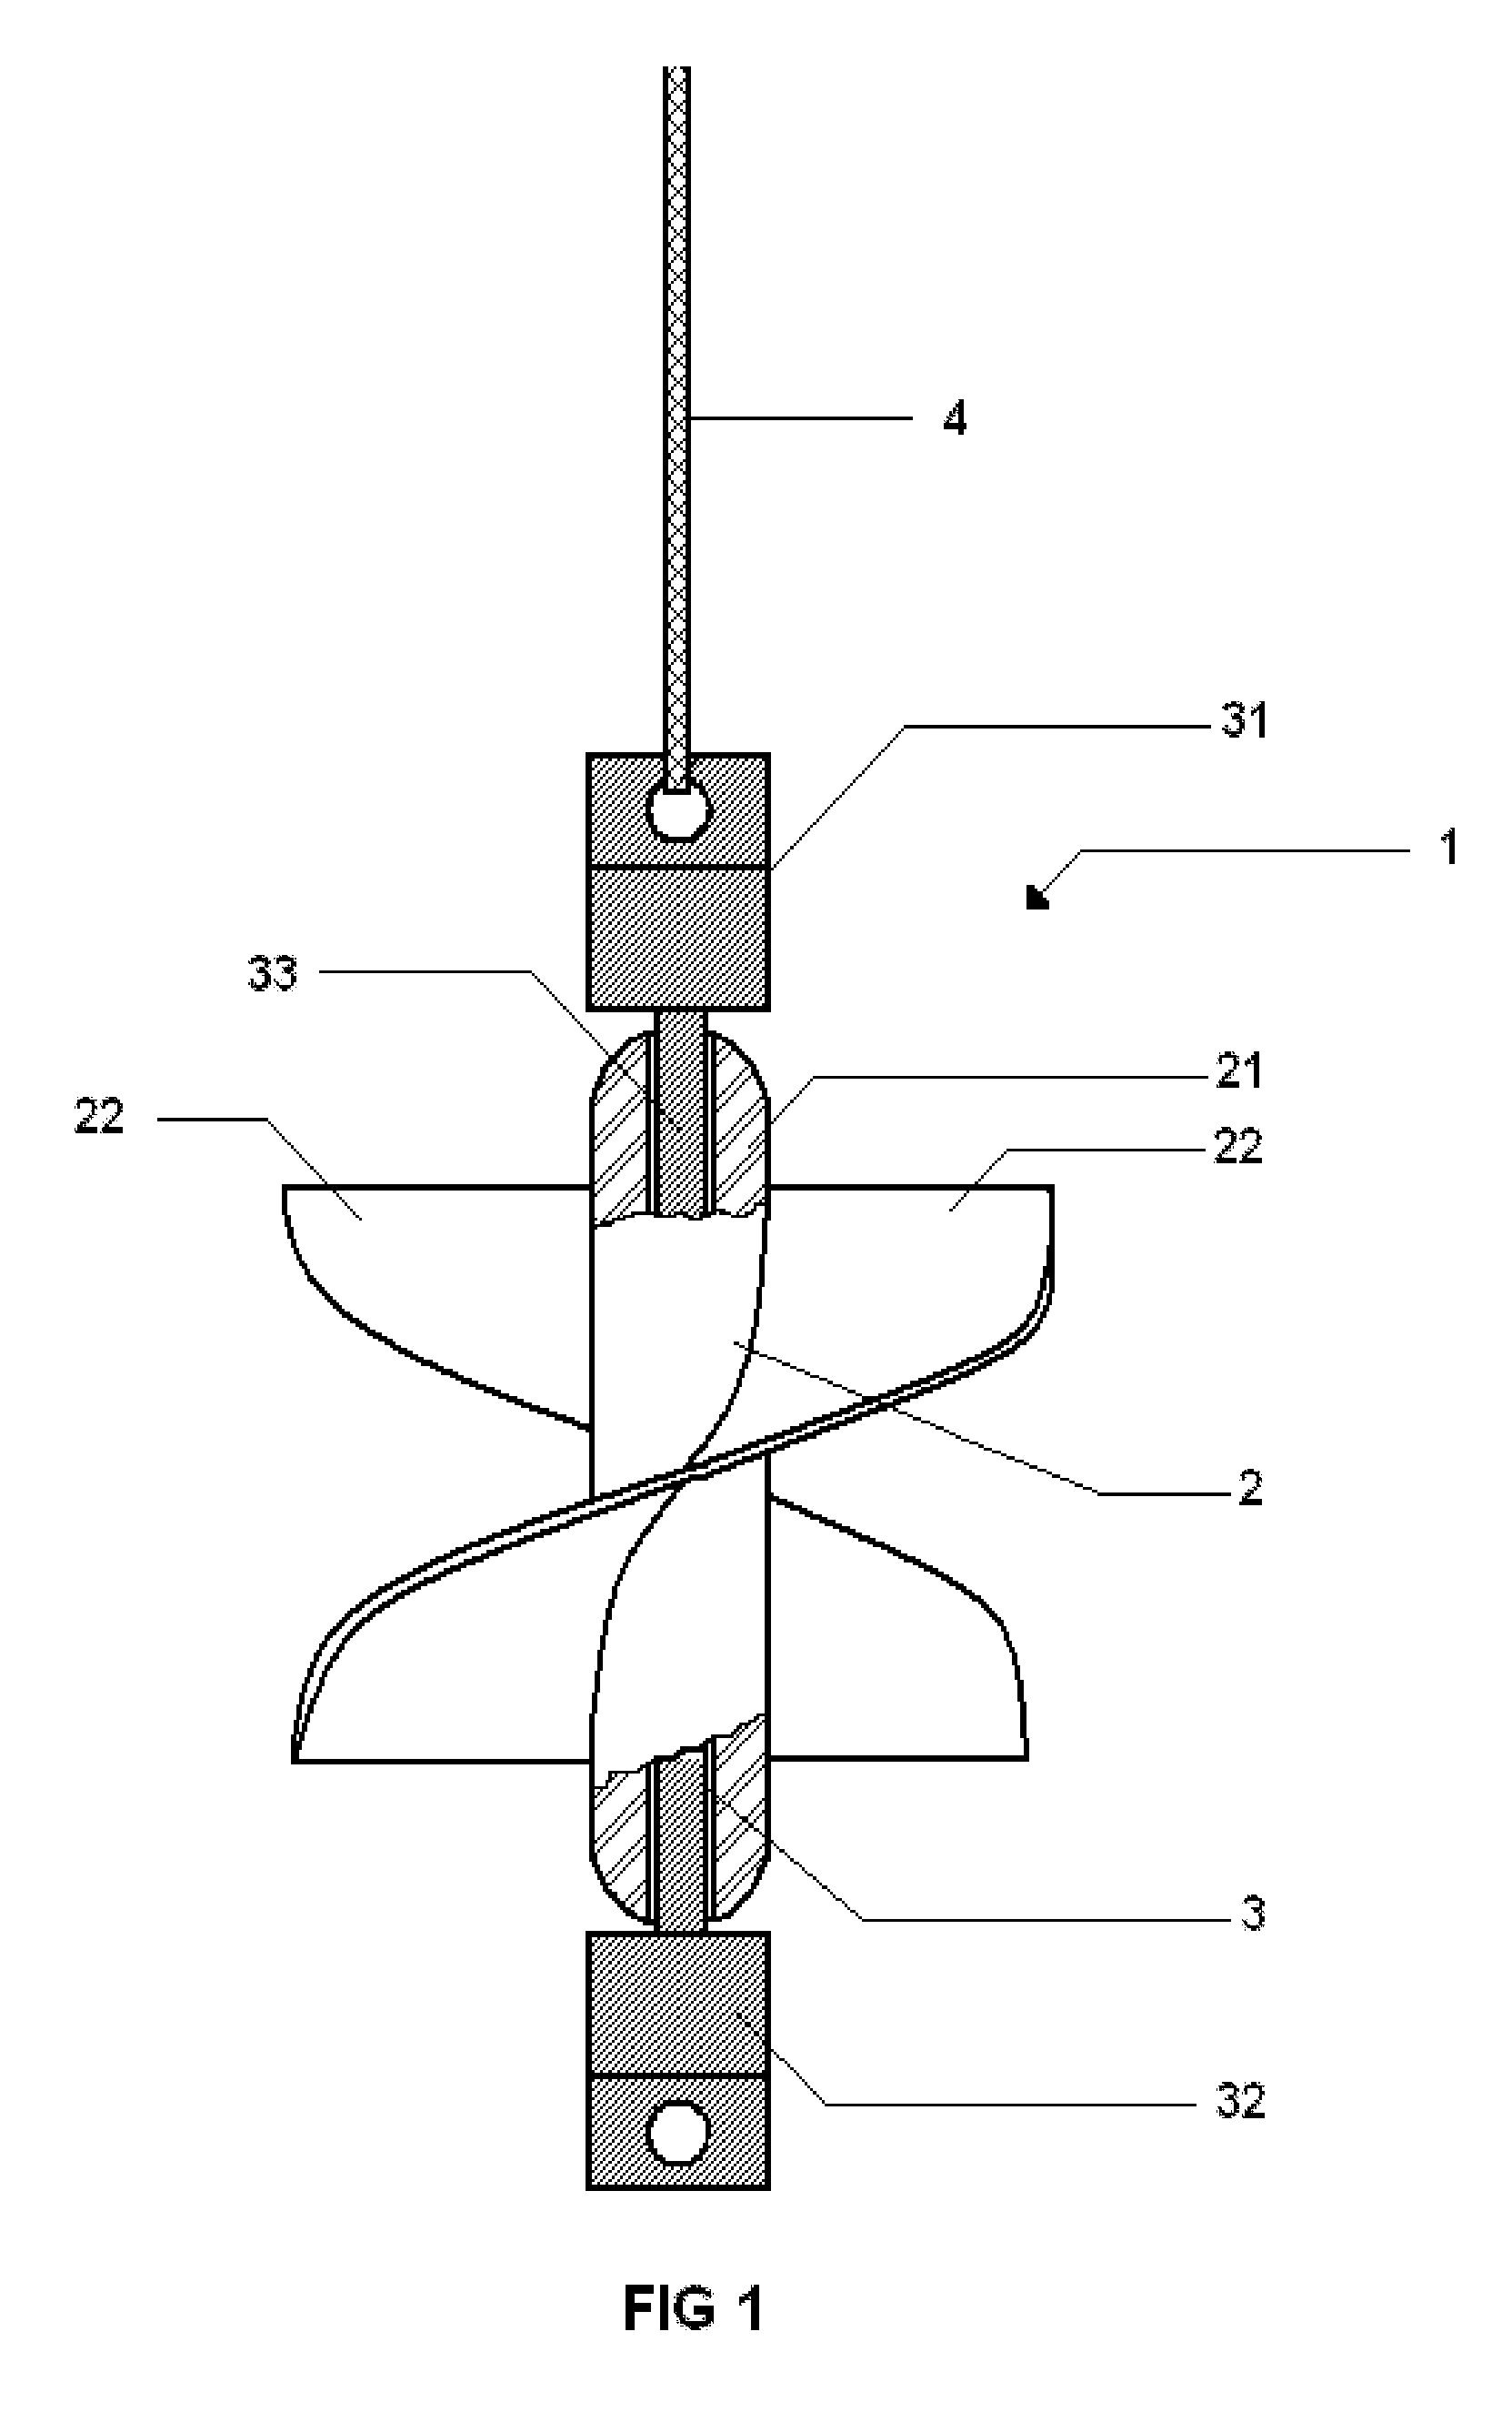 Apparatus and method for loading particulate material into vertical tubes